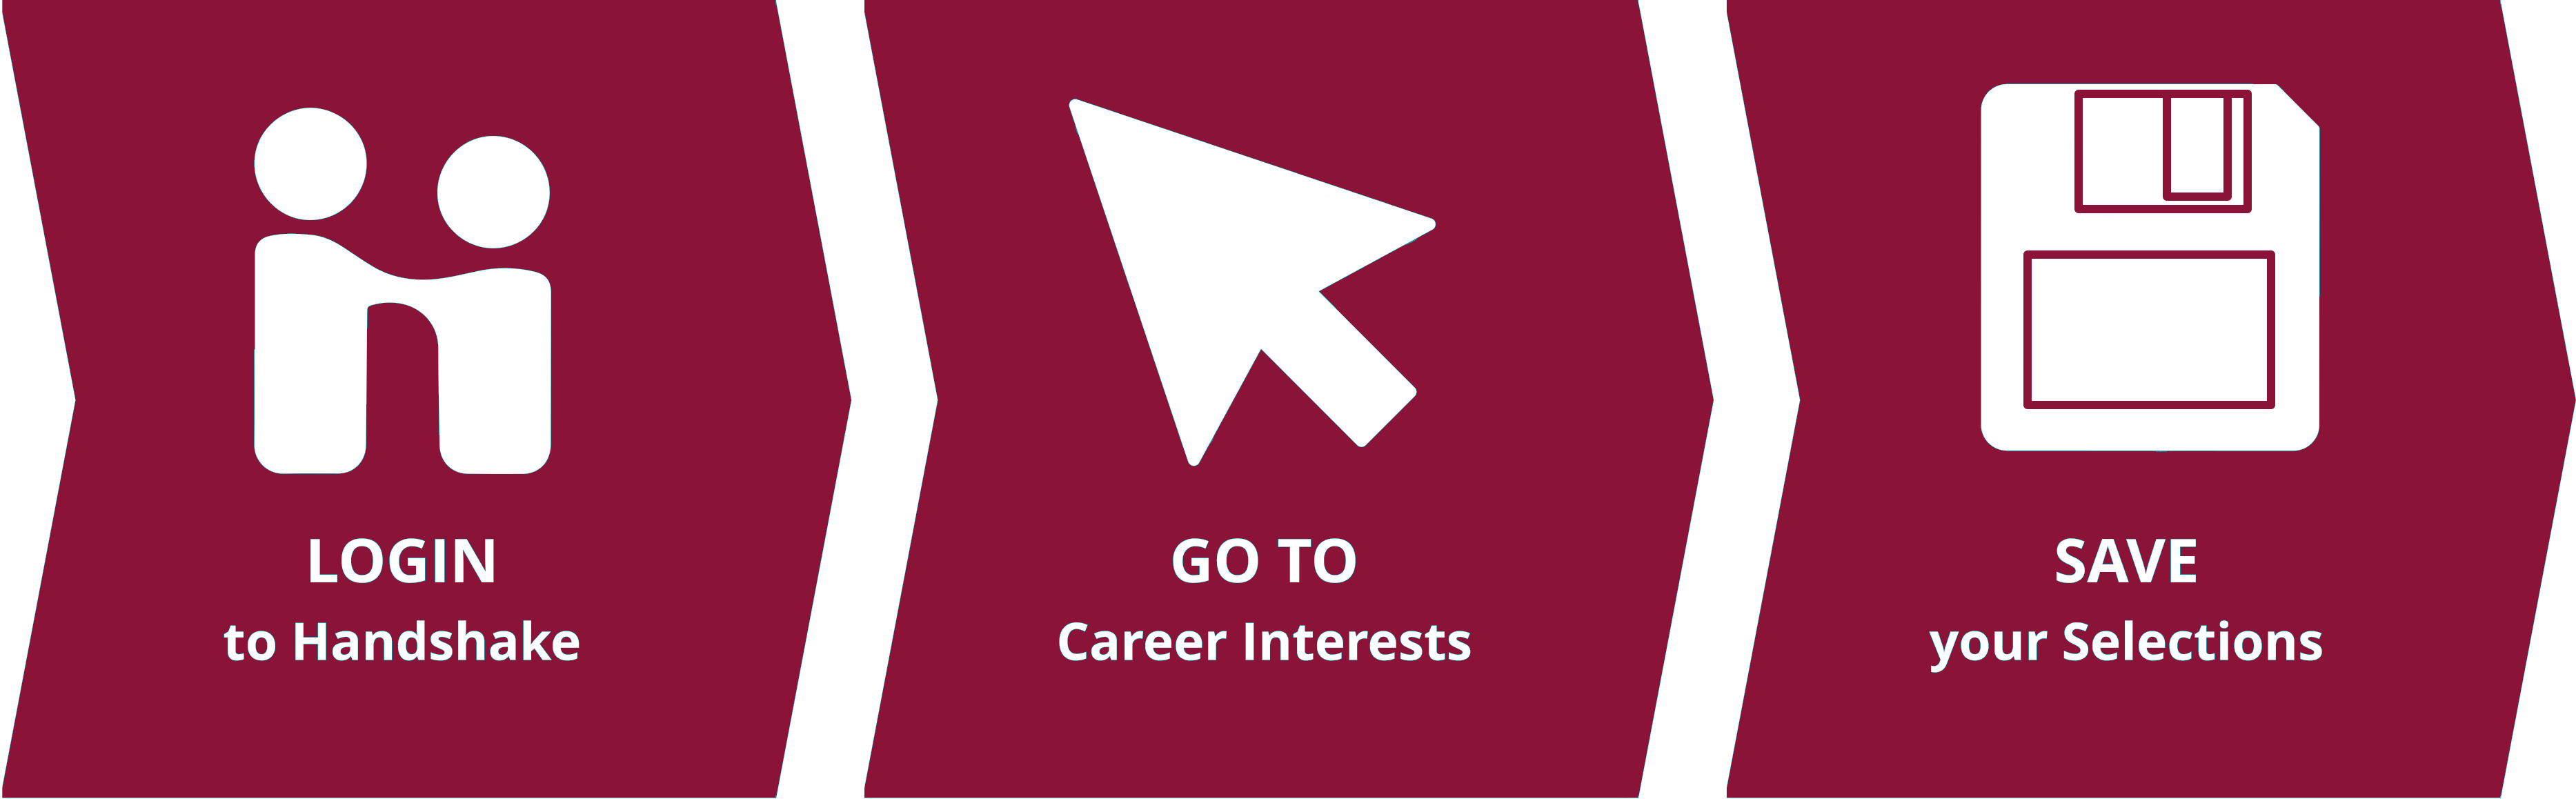 Login to Handshake, Go to Career Interests, Save Your Selections